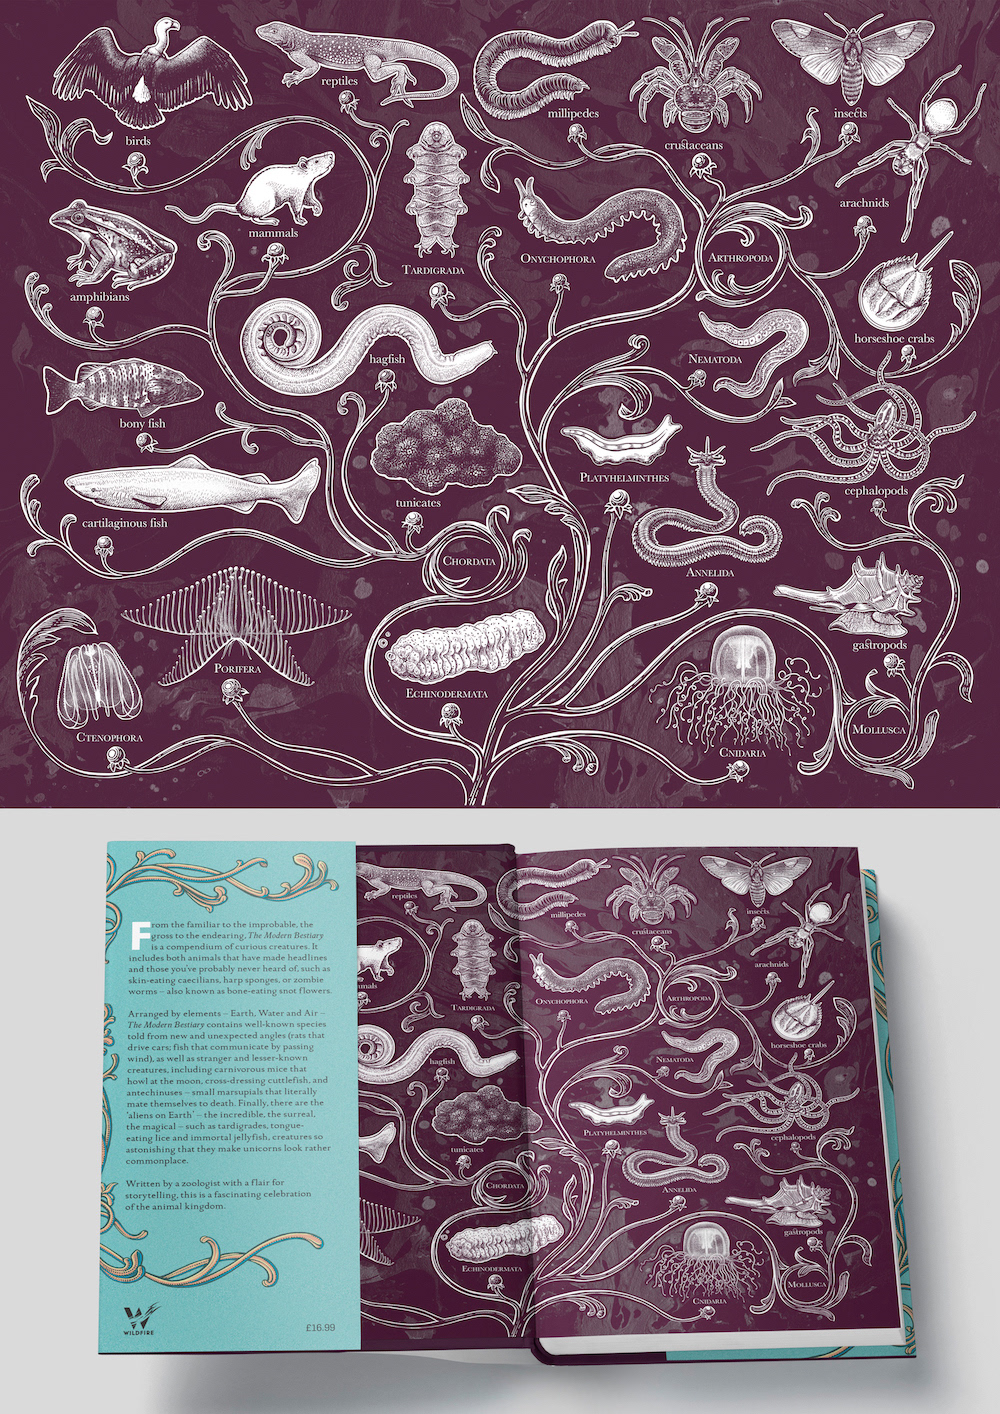 animal Bestiary book cover book design endpapers medieval ornate science scientific illustration zoology